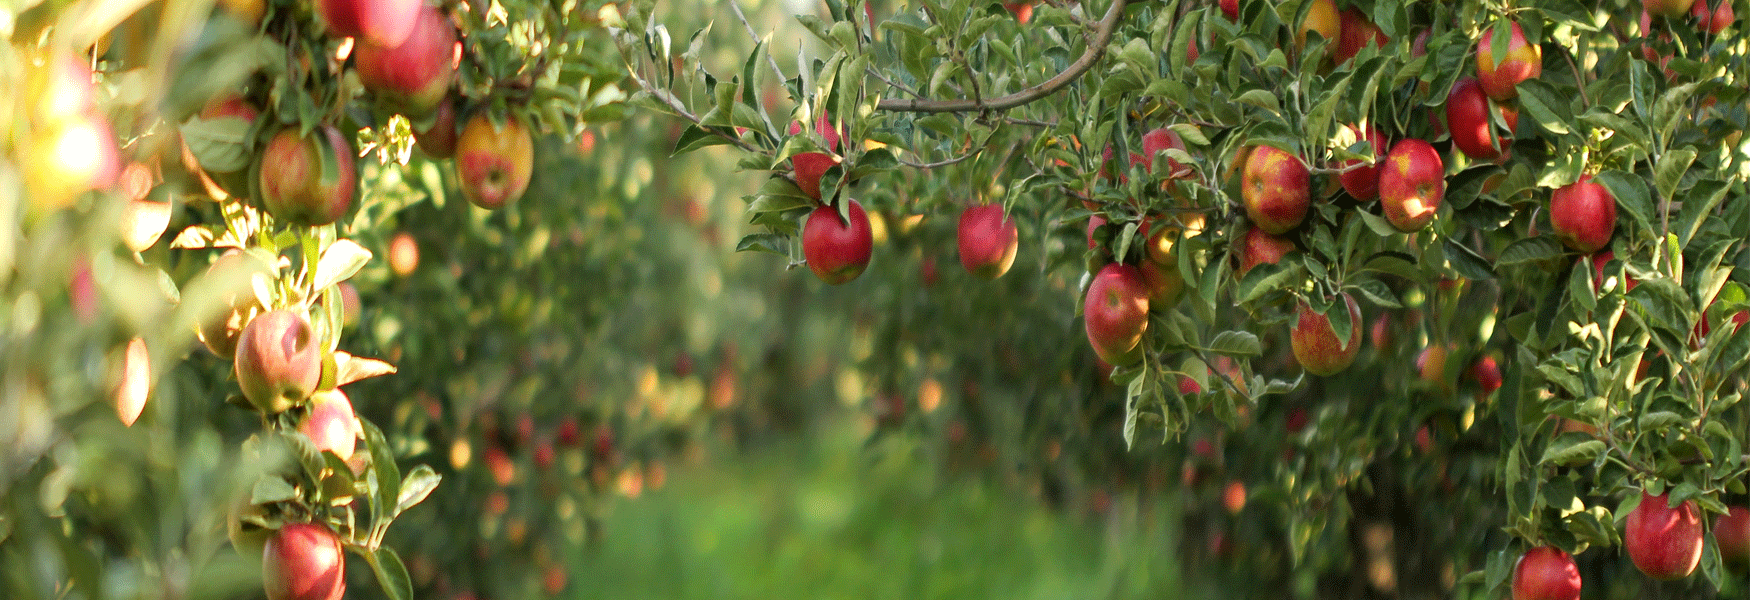 Apple Orchards in Kent laden with fruit, Maidstone, Kent